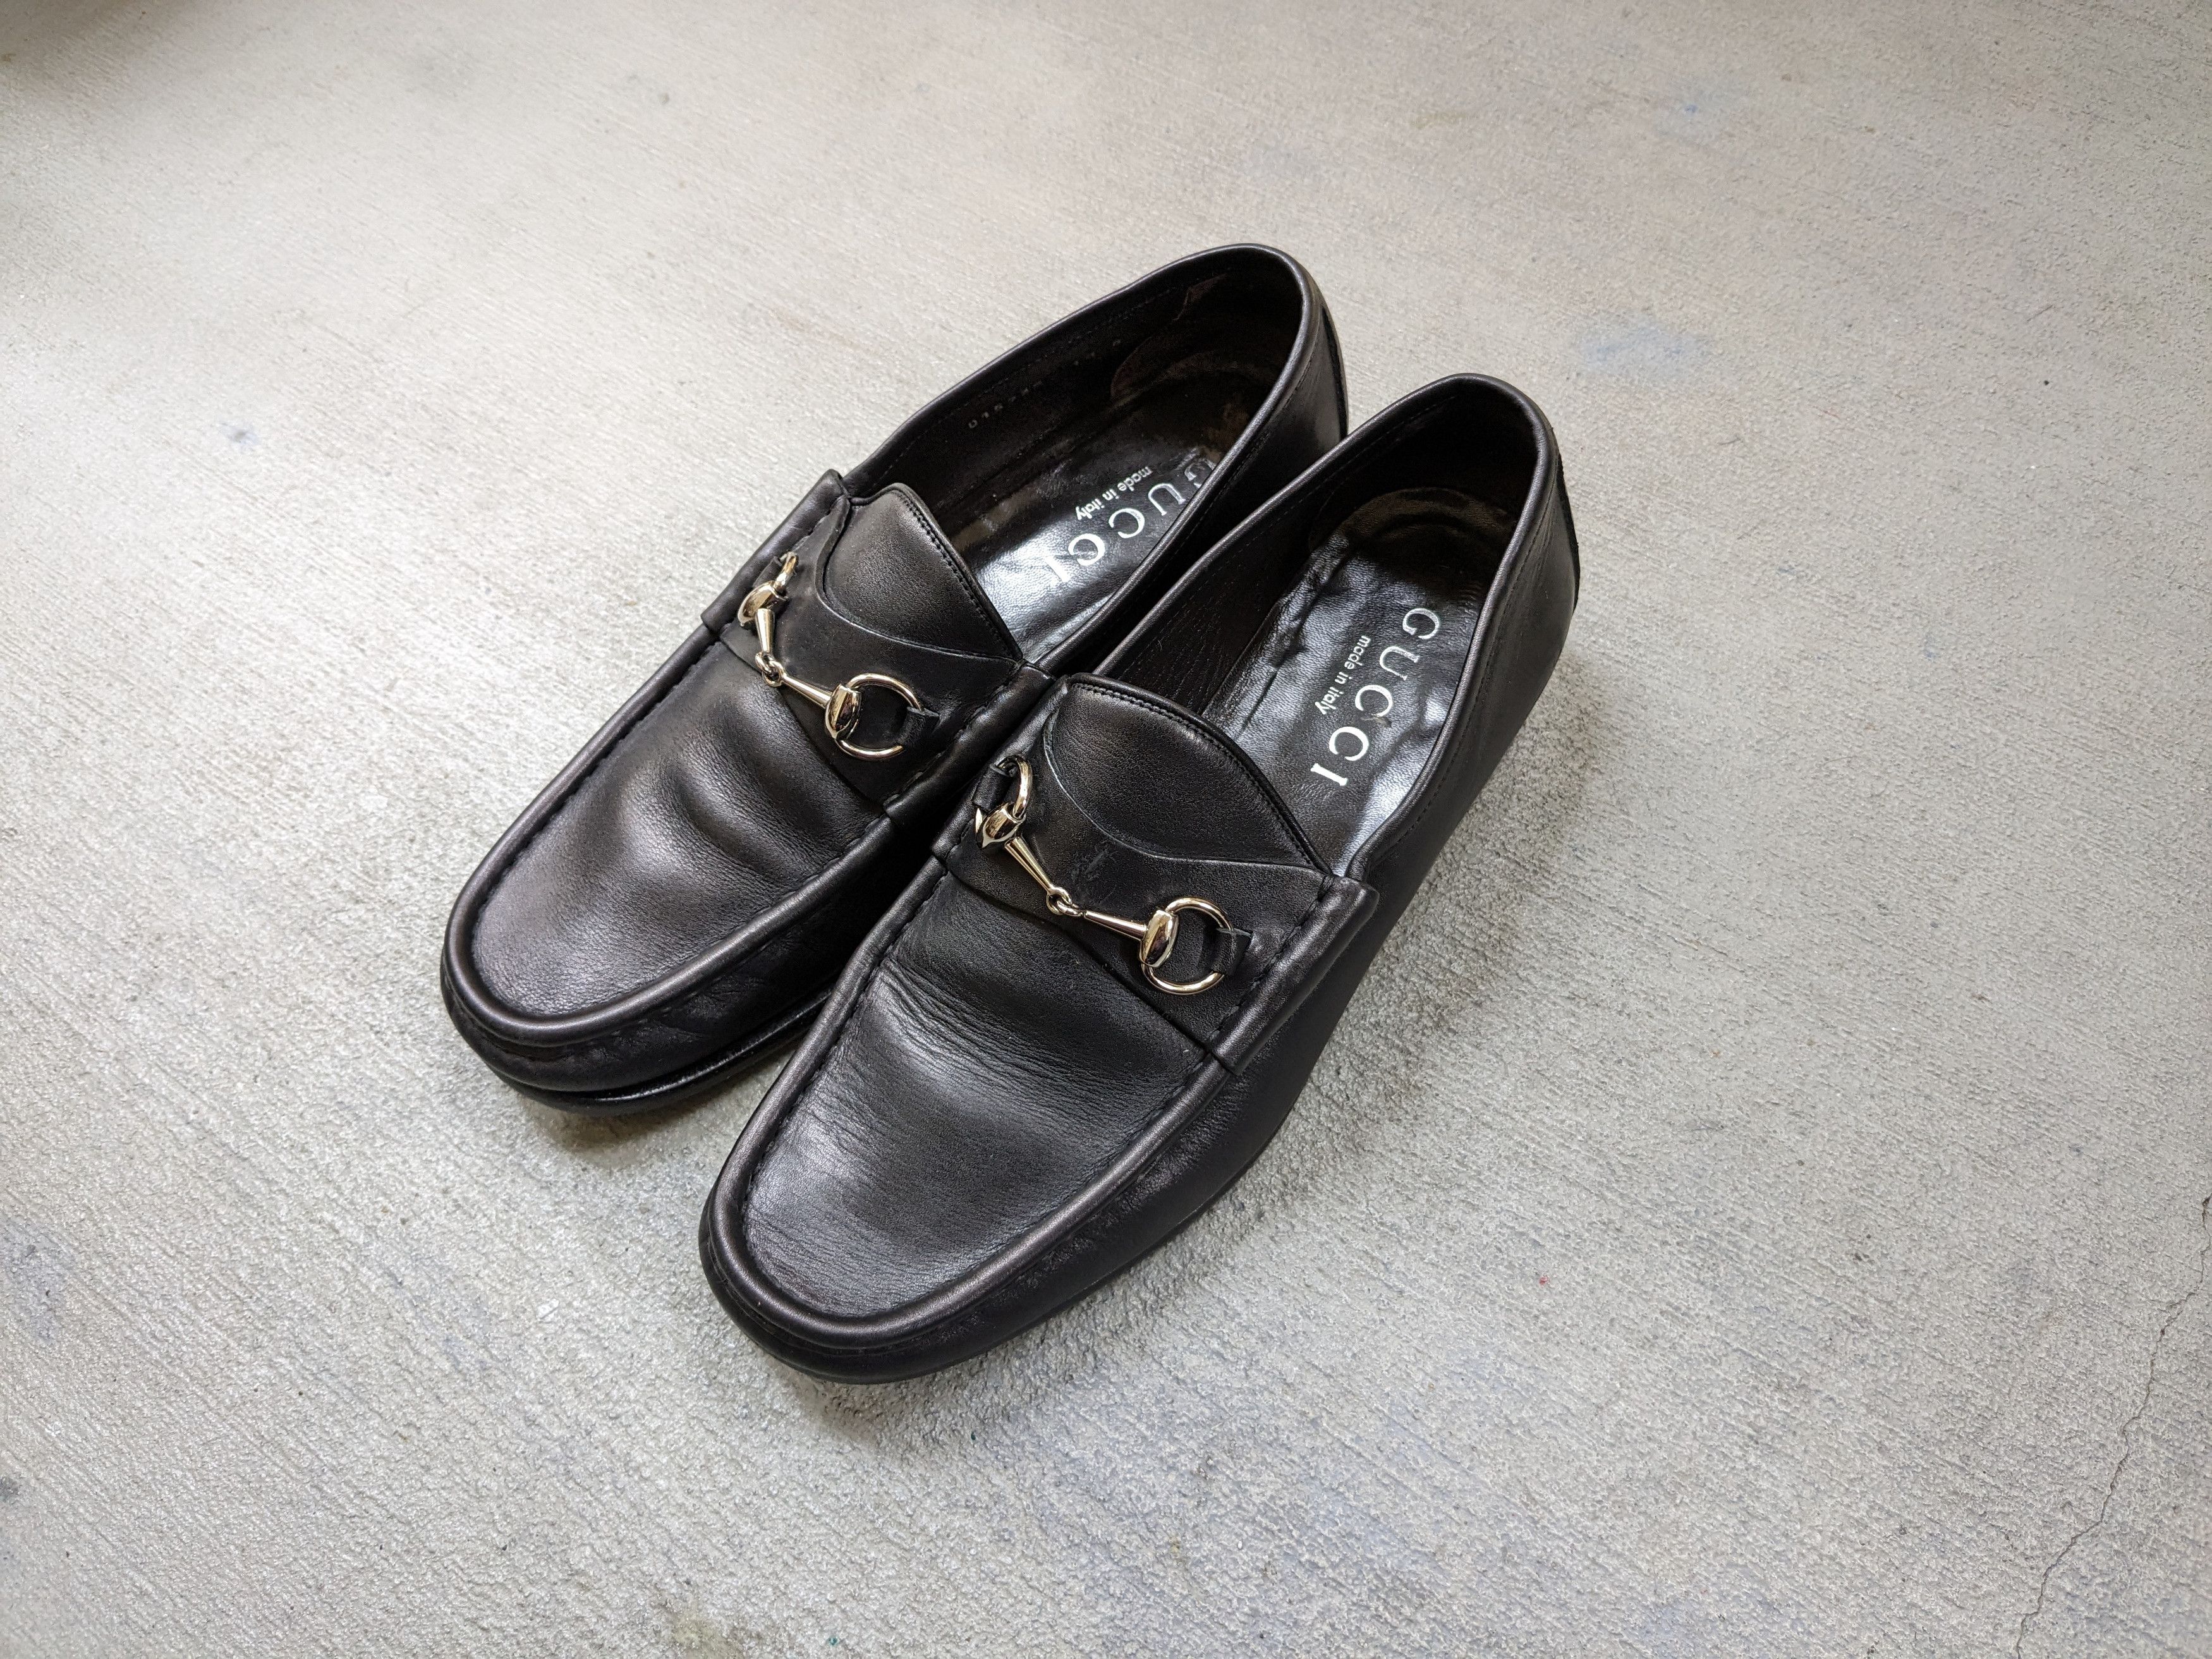 Pre-owned Gucci X Maison Margiela Gucci Horsebit Loafers Black 10 D Slip Ons Buckle Tom Ford In Black Silver